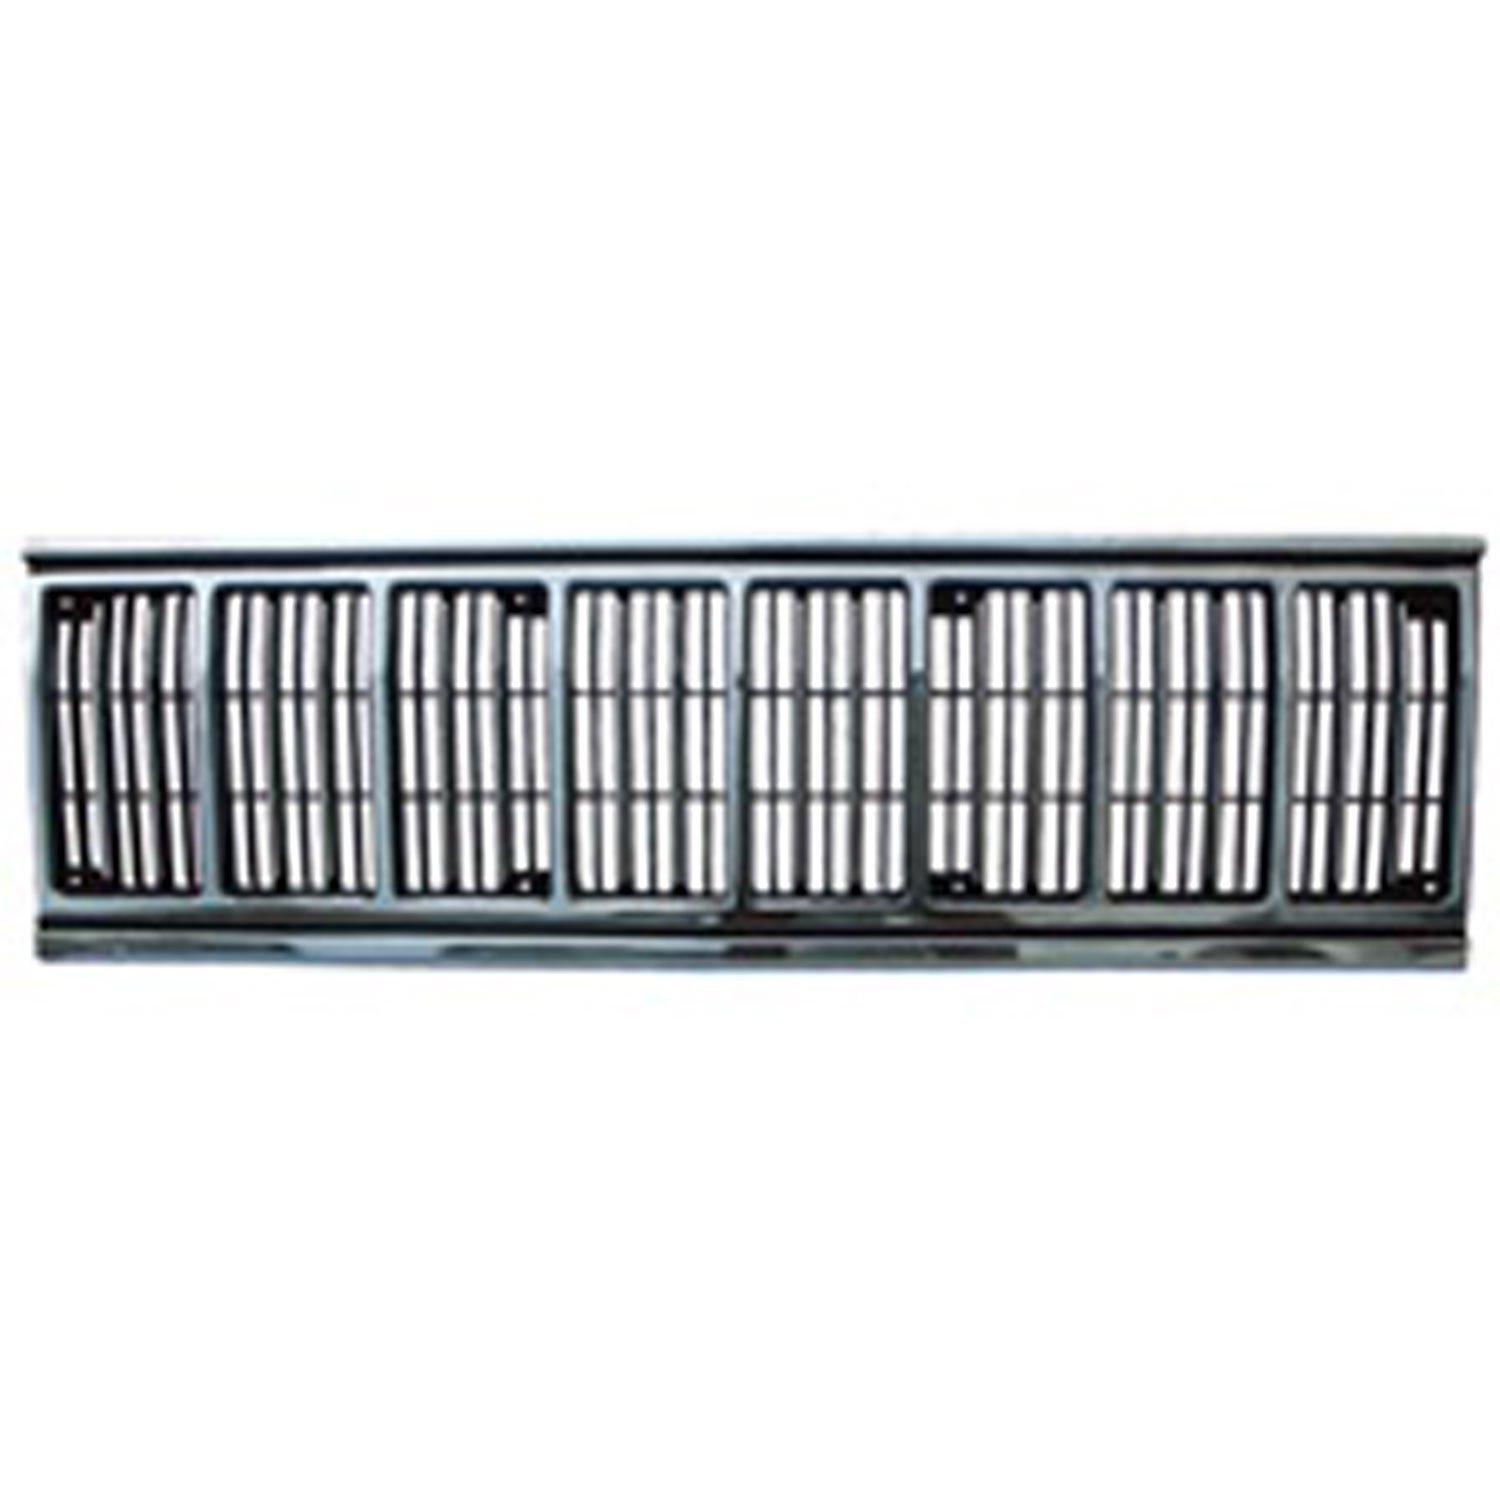 This black and chrome grille insert from Omix-ADA